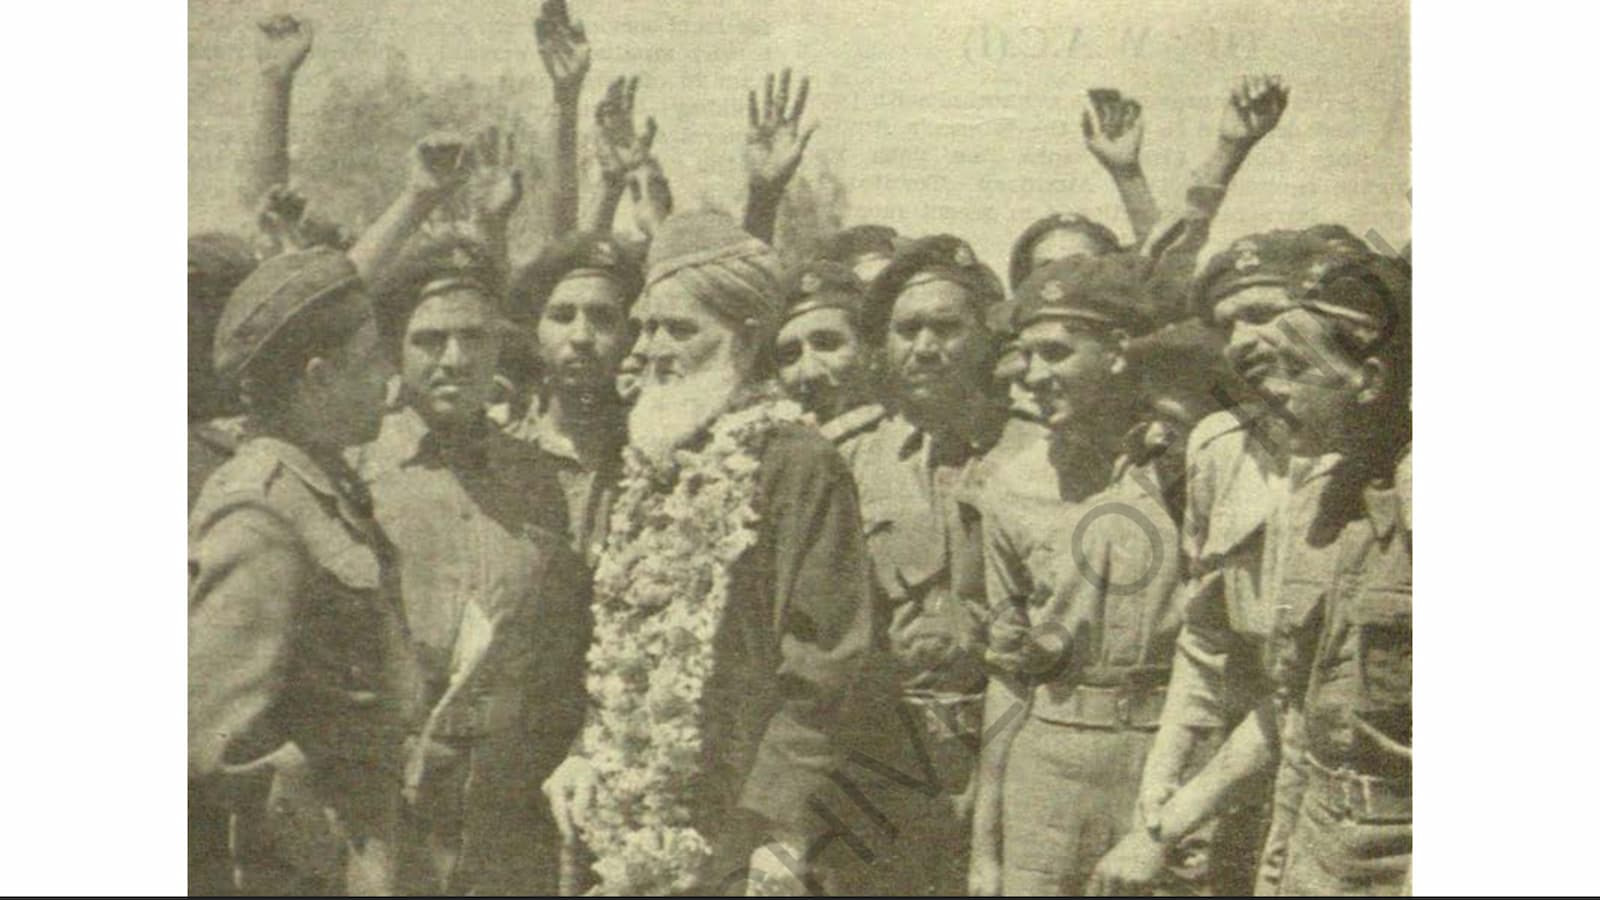 Shams-ul Ulema Maulvi Sayed Ahmed at the Middle East Command with the officers and soldiers